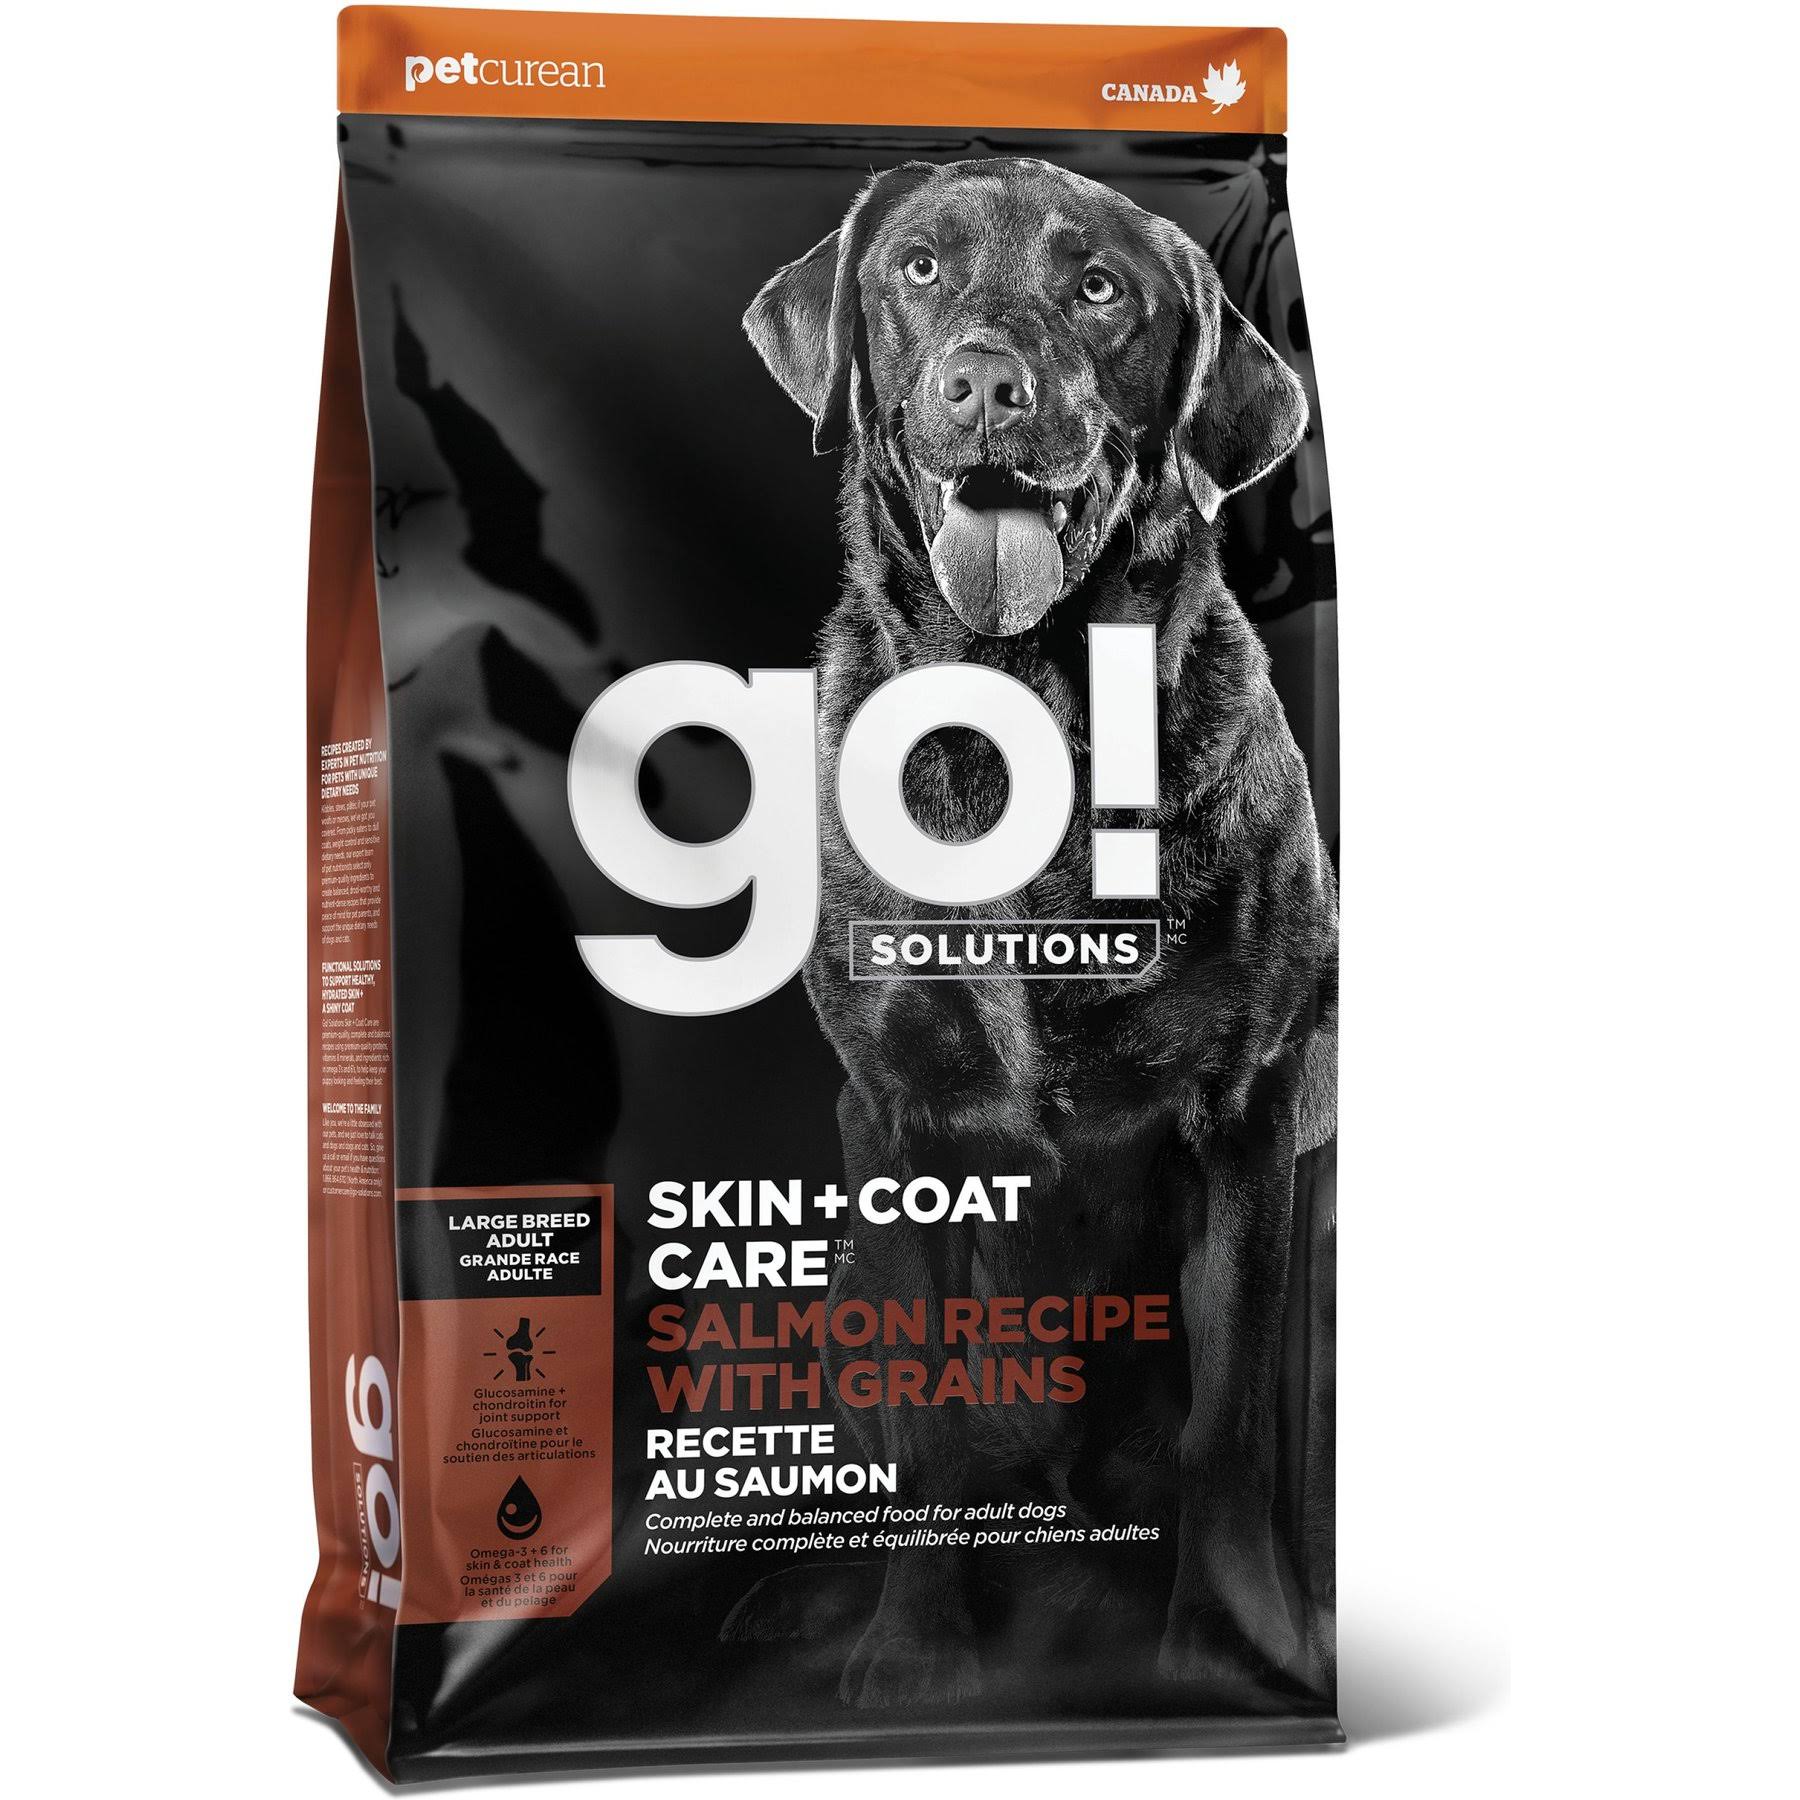 Go! Solutions Skin + Coat with Grains Large Breed Recipe for Adult Dogs - 25 lb Bag | PetFlow